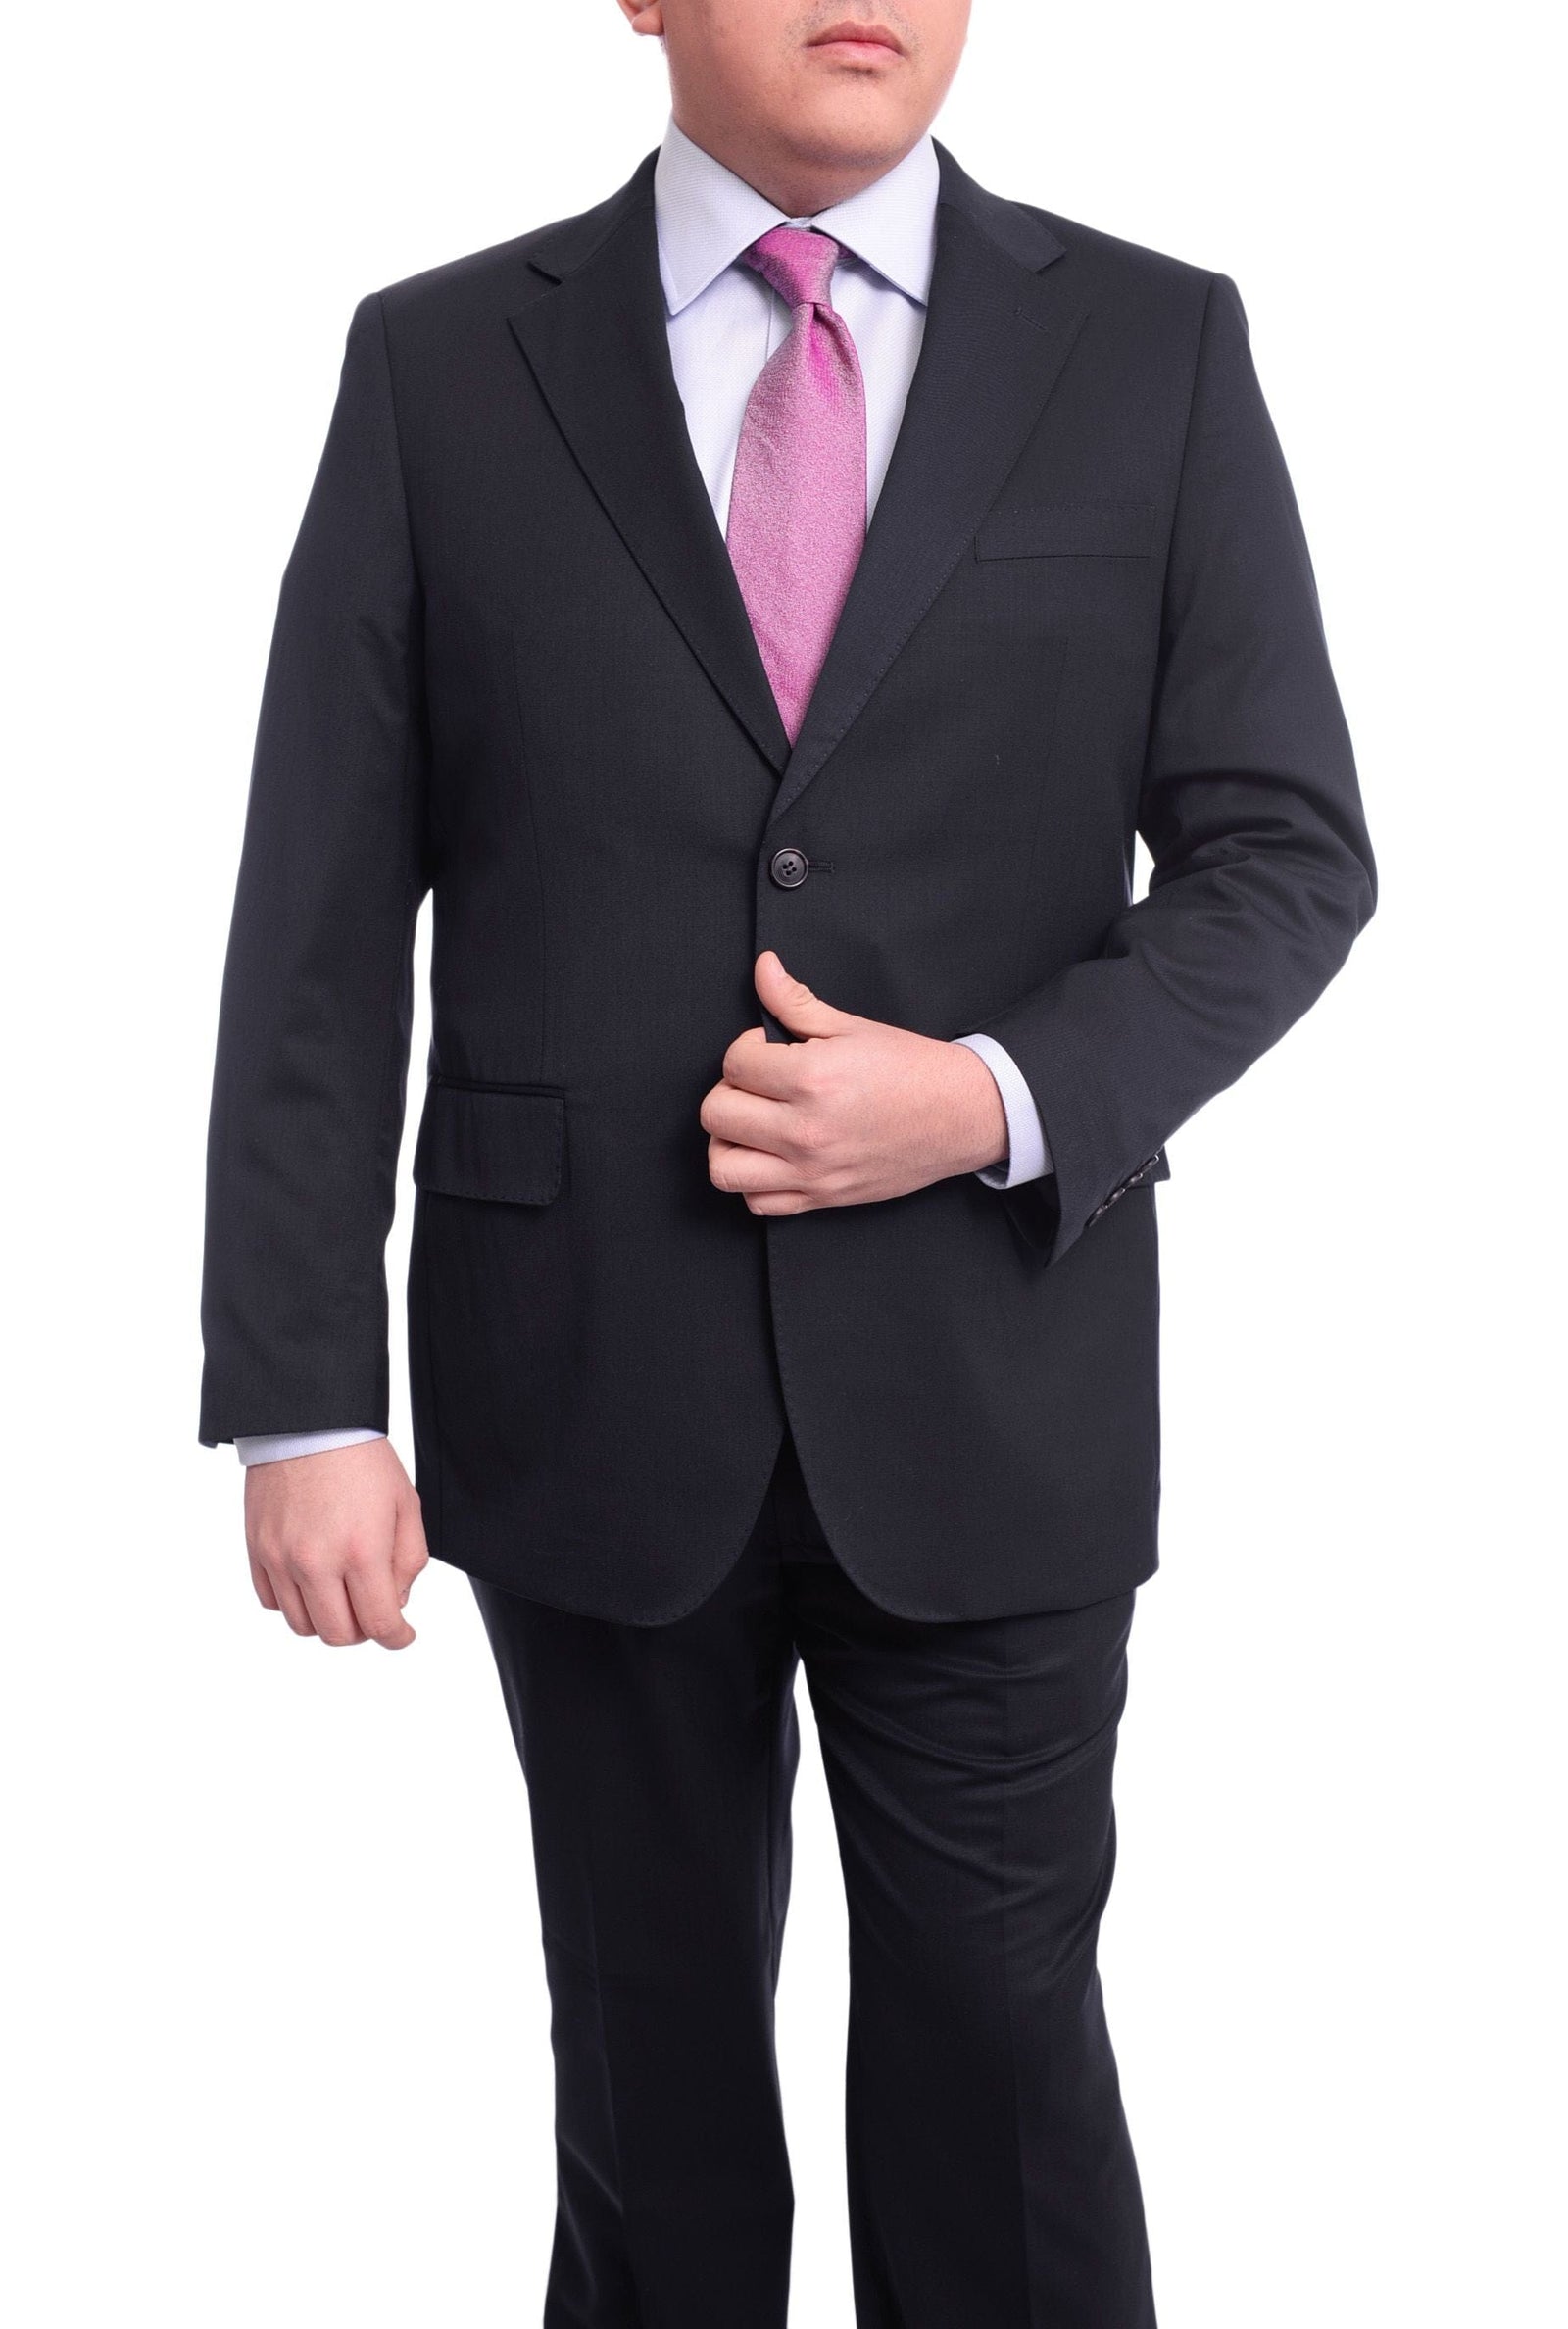 How Should Your Dress Pants Fit Properly - Suits Expert